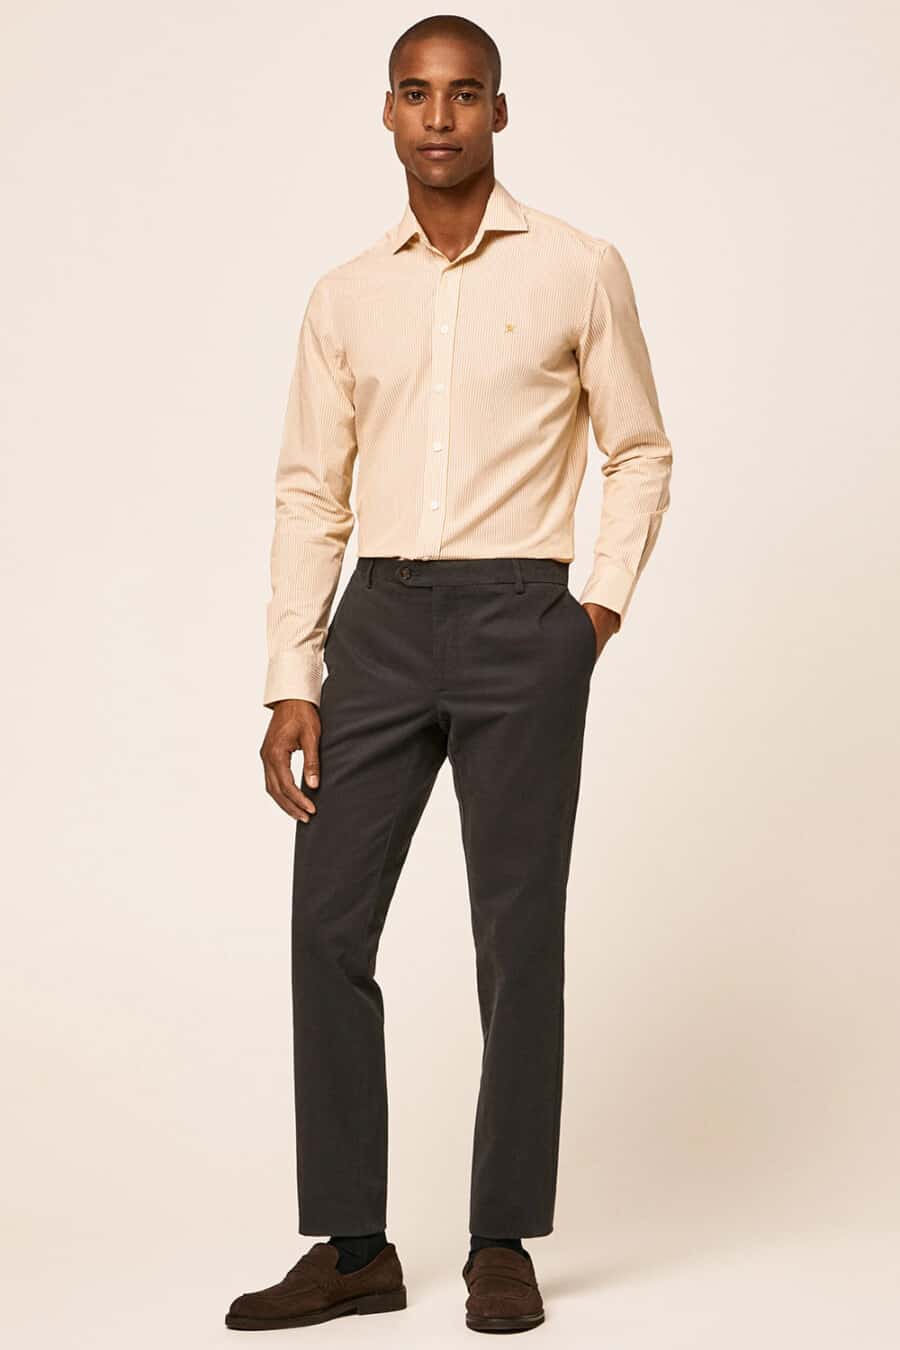 Men's dark grey chinos, light yellow dress shirt and brown suede loafers outfit